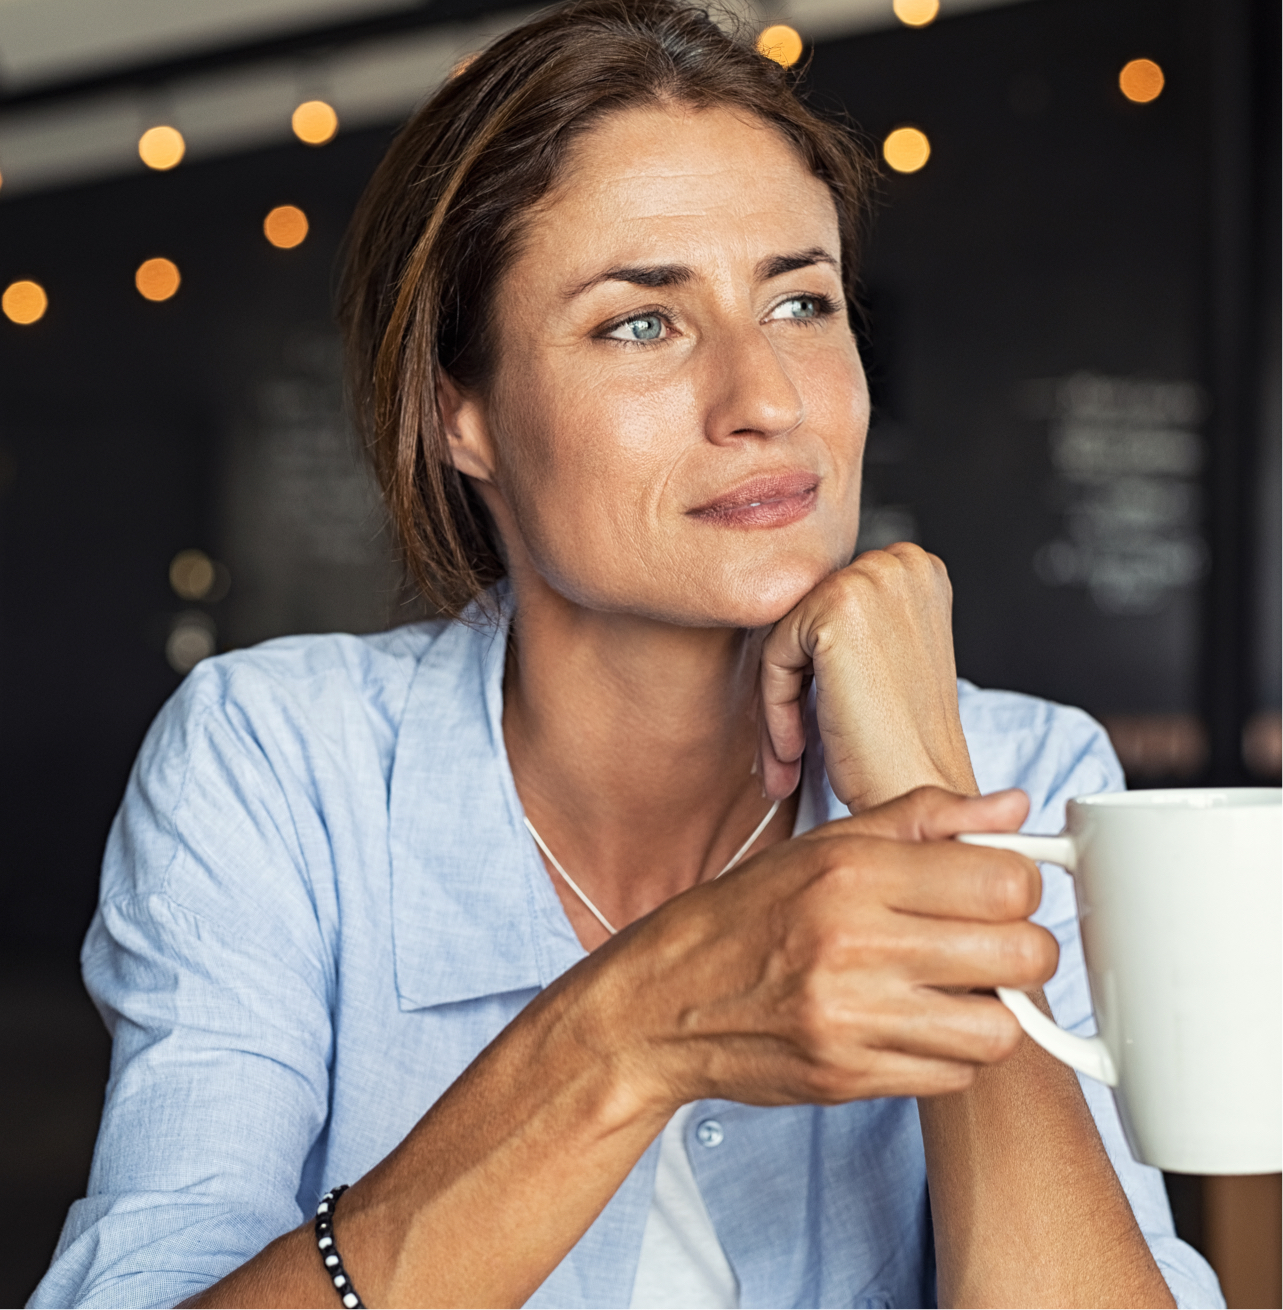 middle aged woman drinking coffee